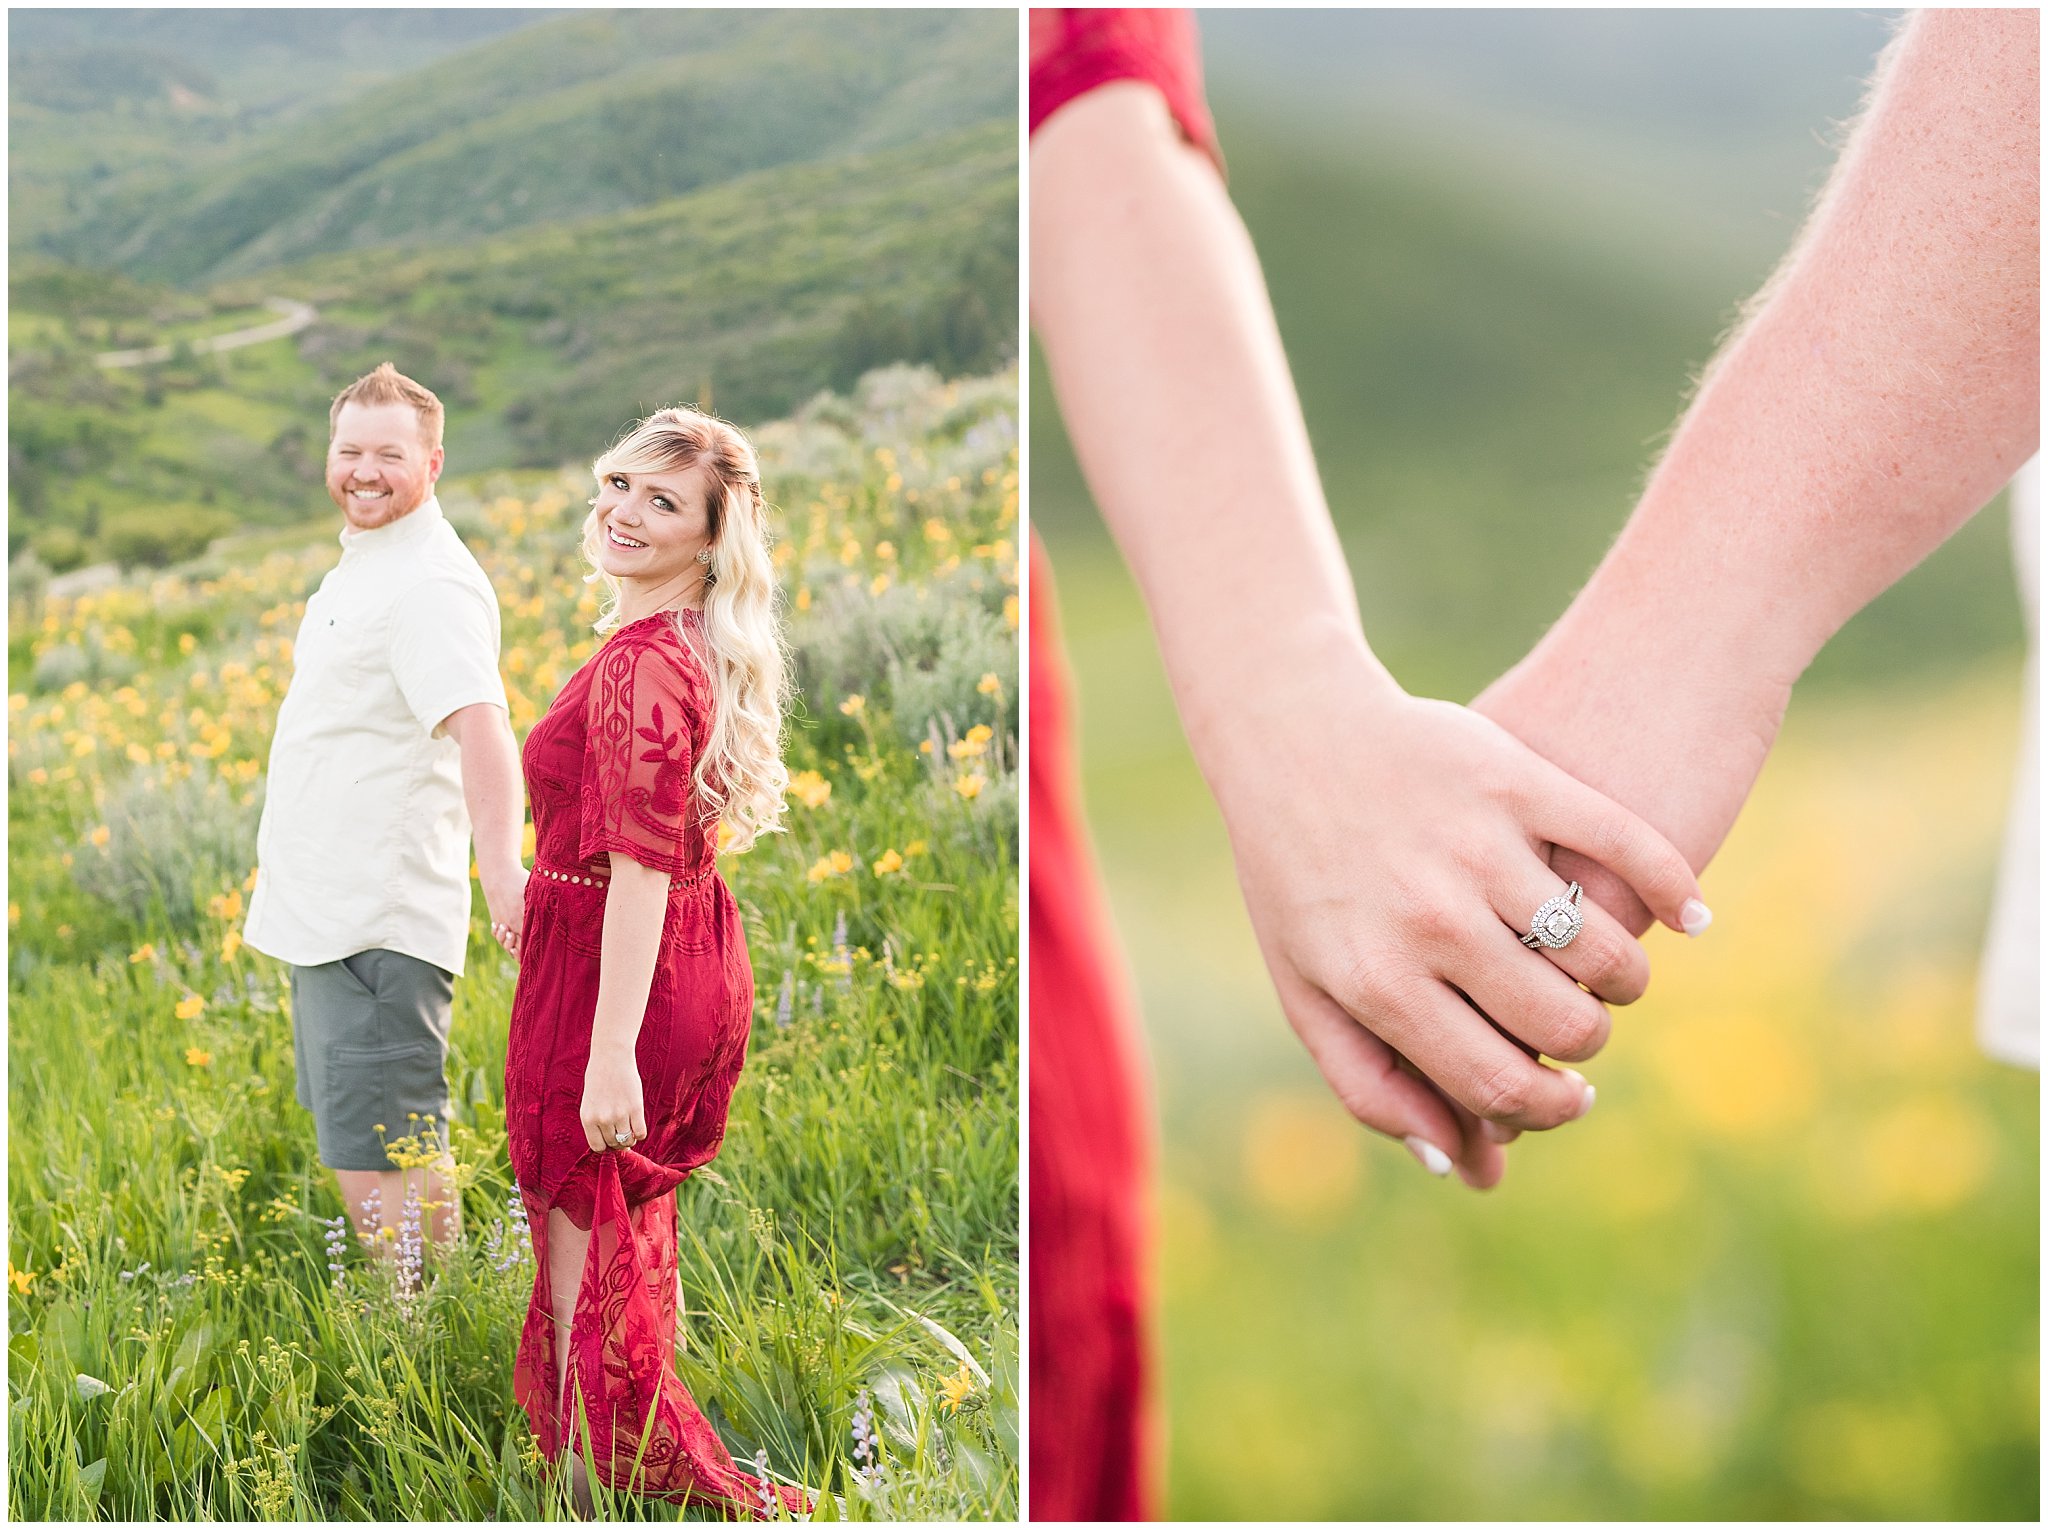 Couple walks through wildflowers during Utah mountain engagement session | Top Utah Wedding and Couples Photos 2019 | Jessie and Dallin Photography